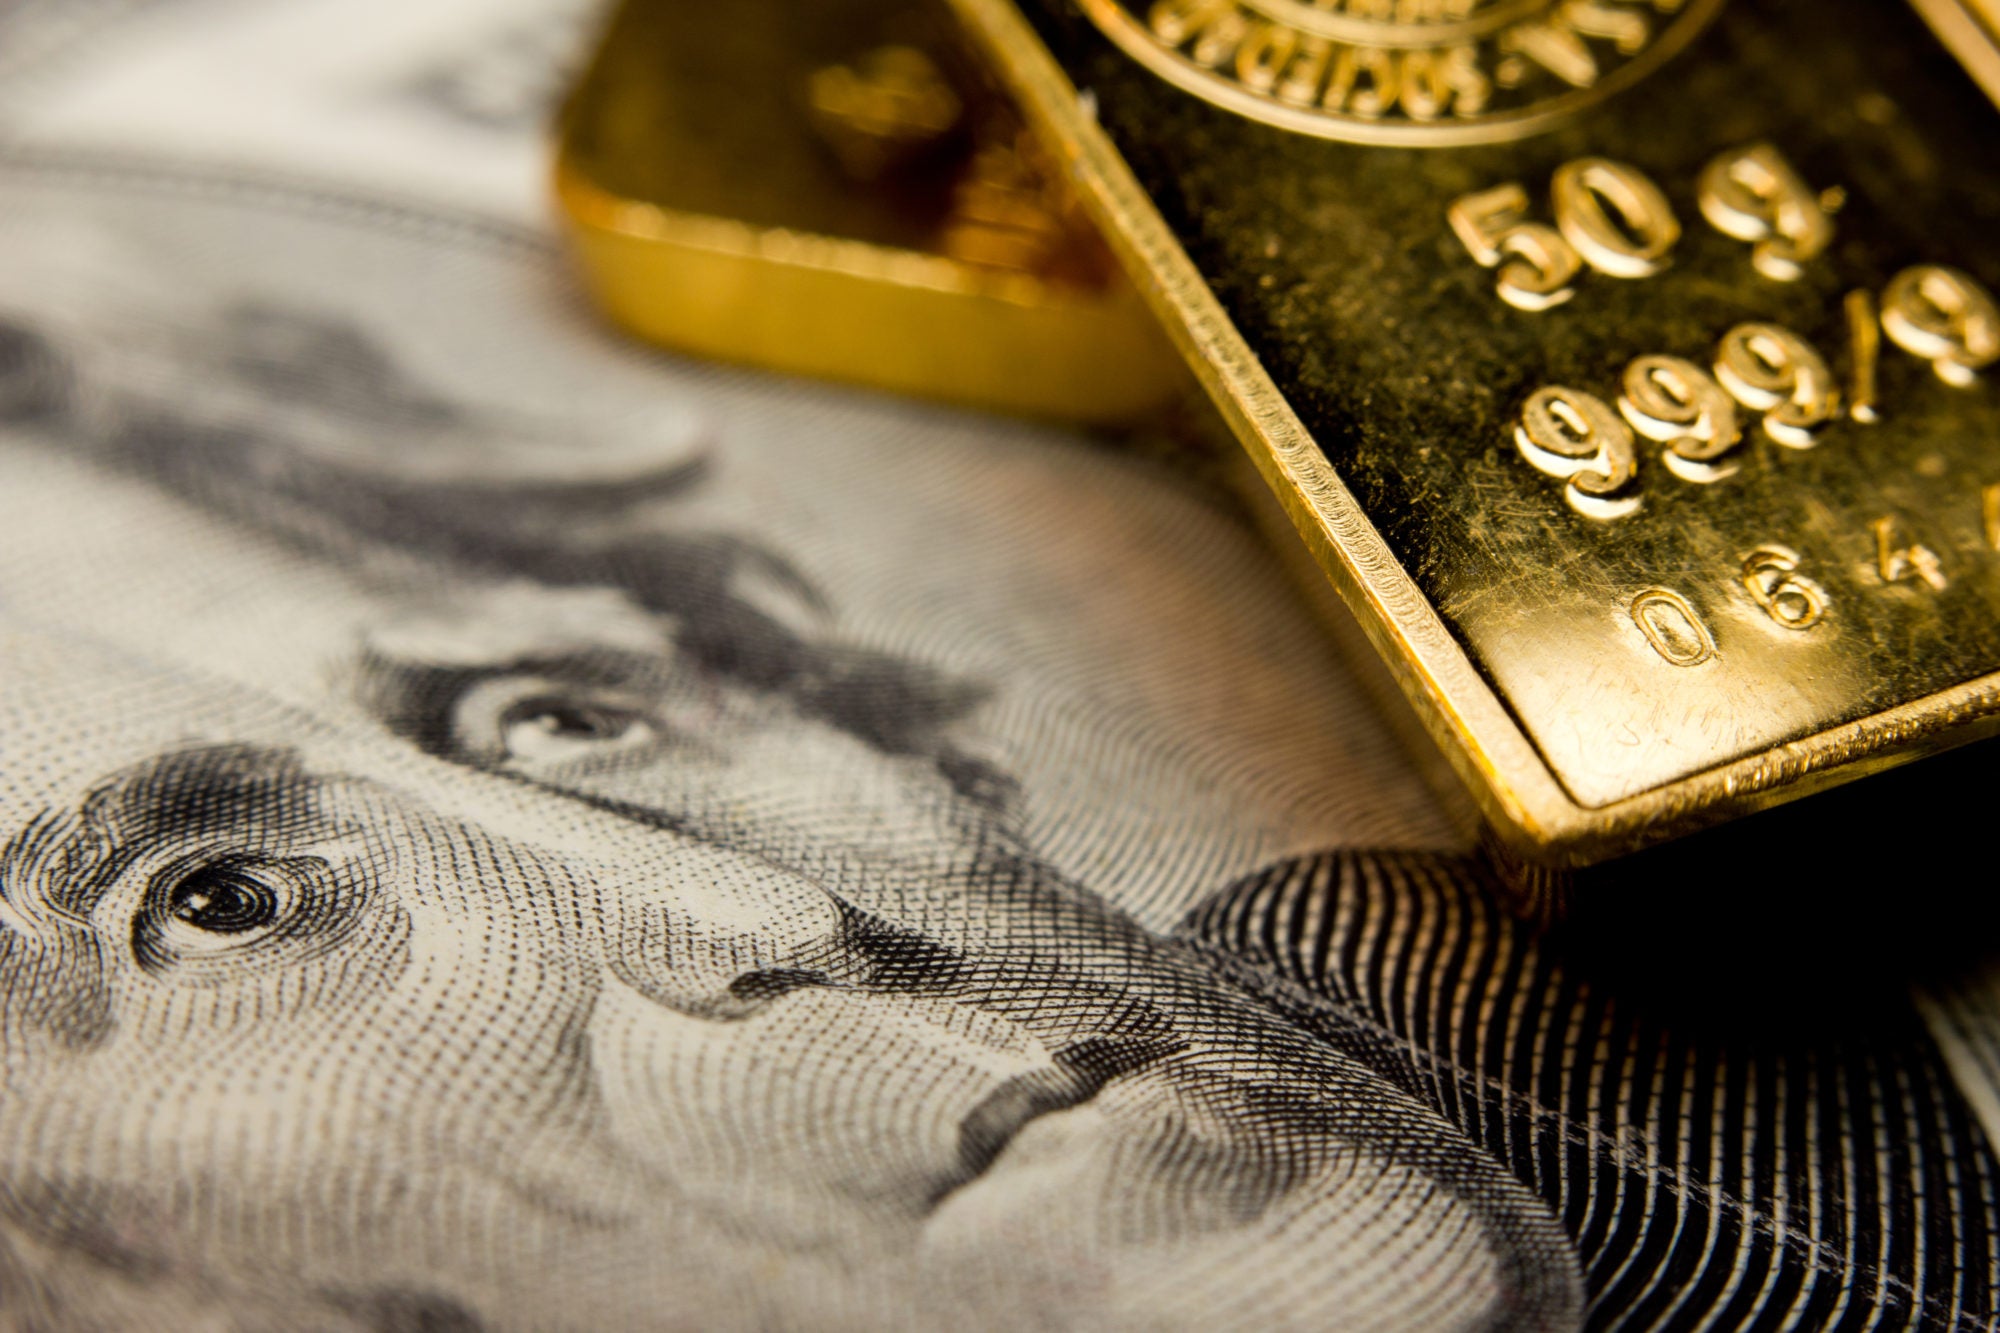 LEARN ABOUT THE GOLD STANDARD PT. 1: WHY IS GOLD USED AS CURRENCY?